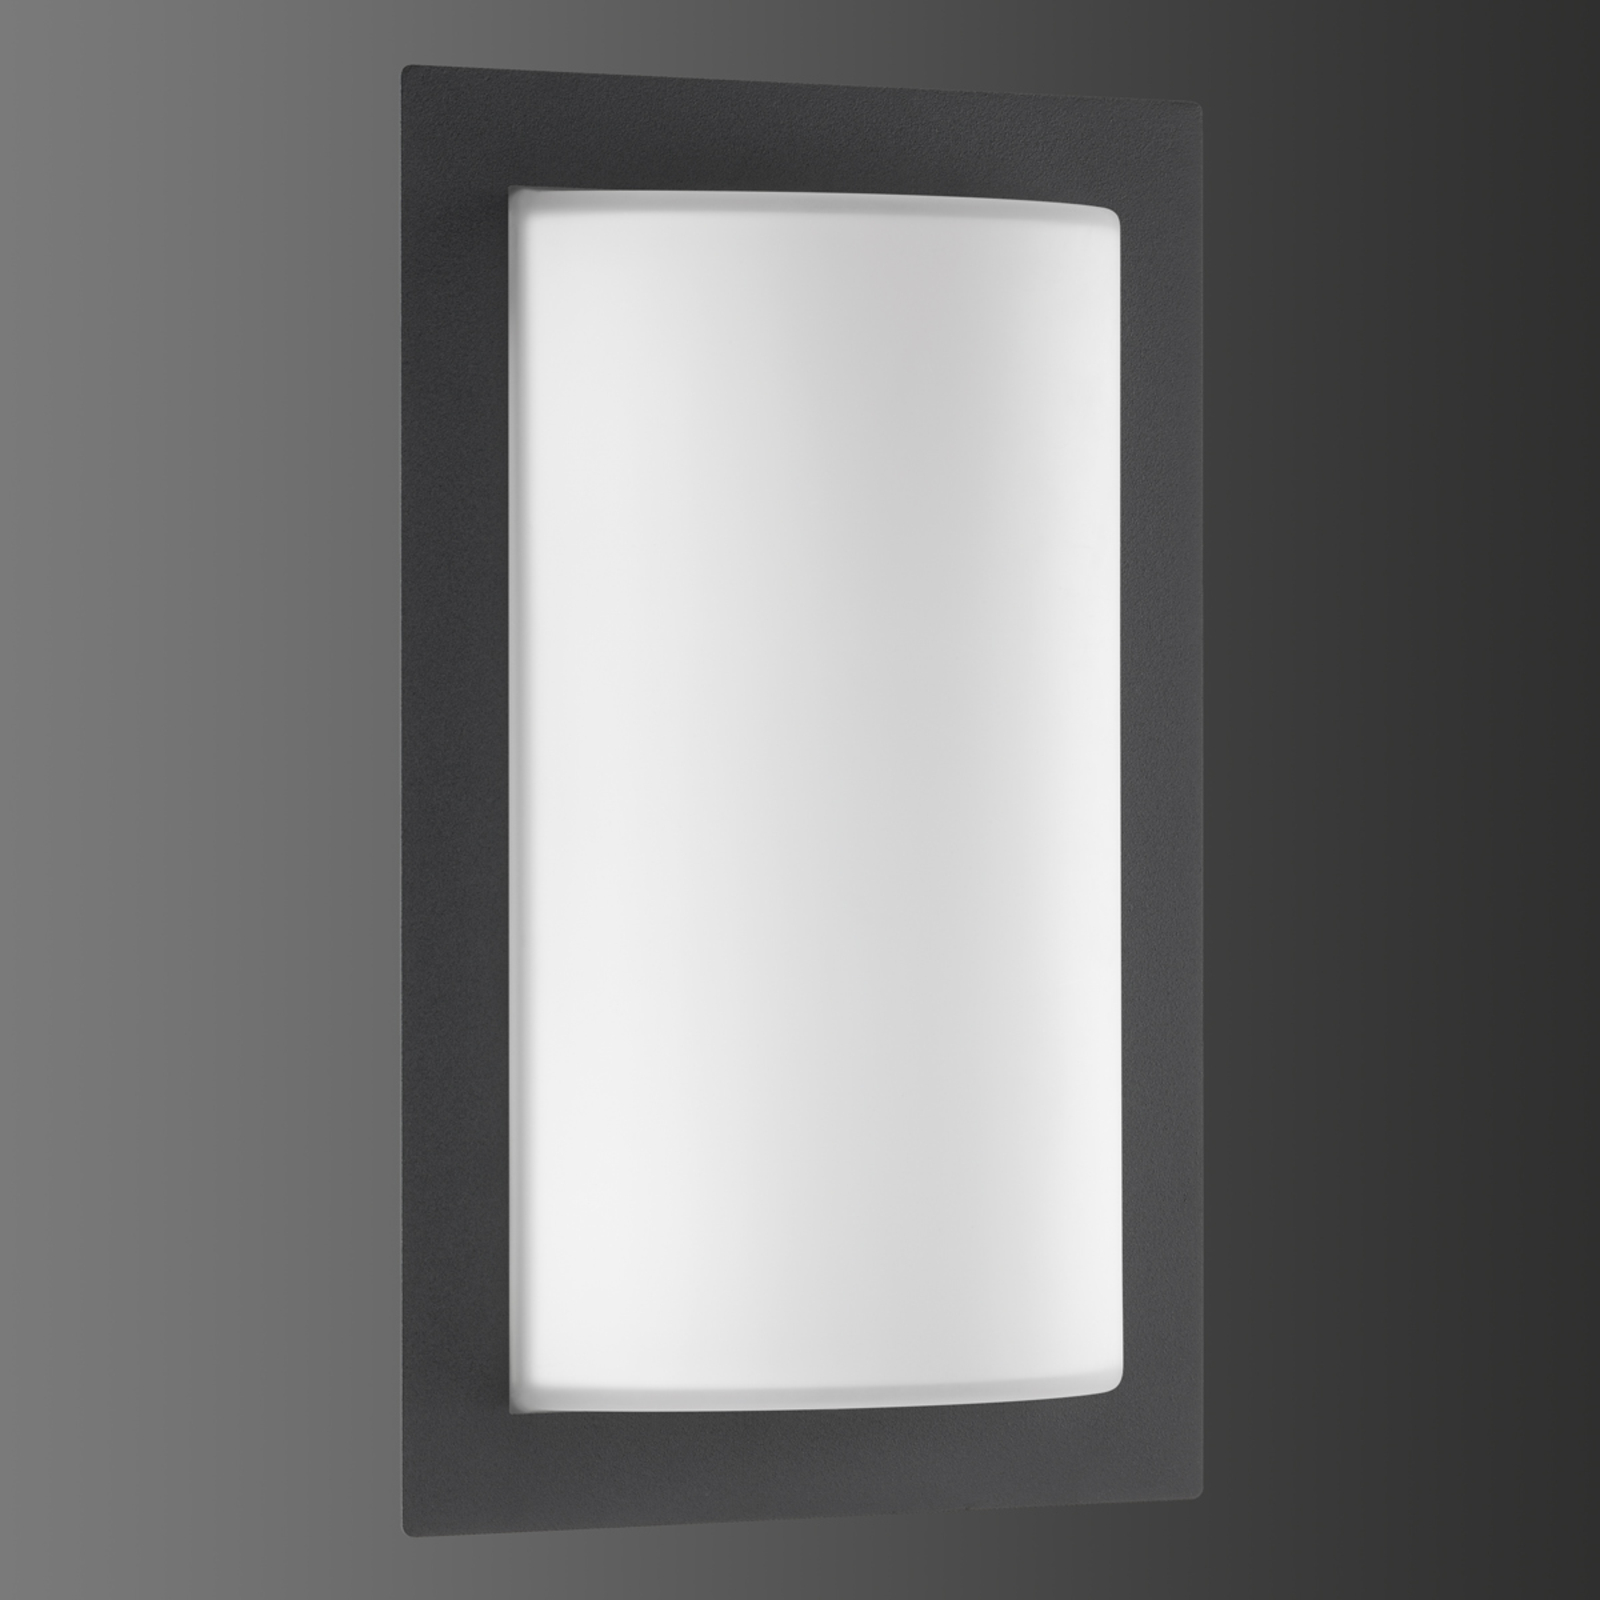 Luis LED outdoor wall light with motion detector